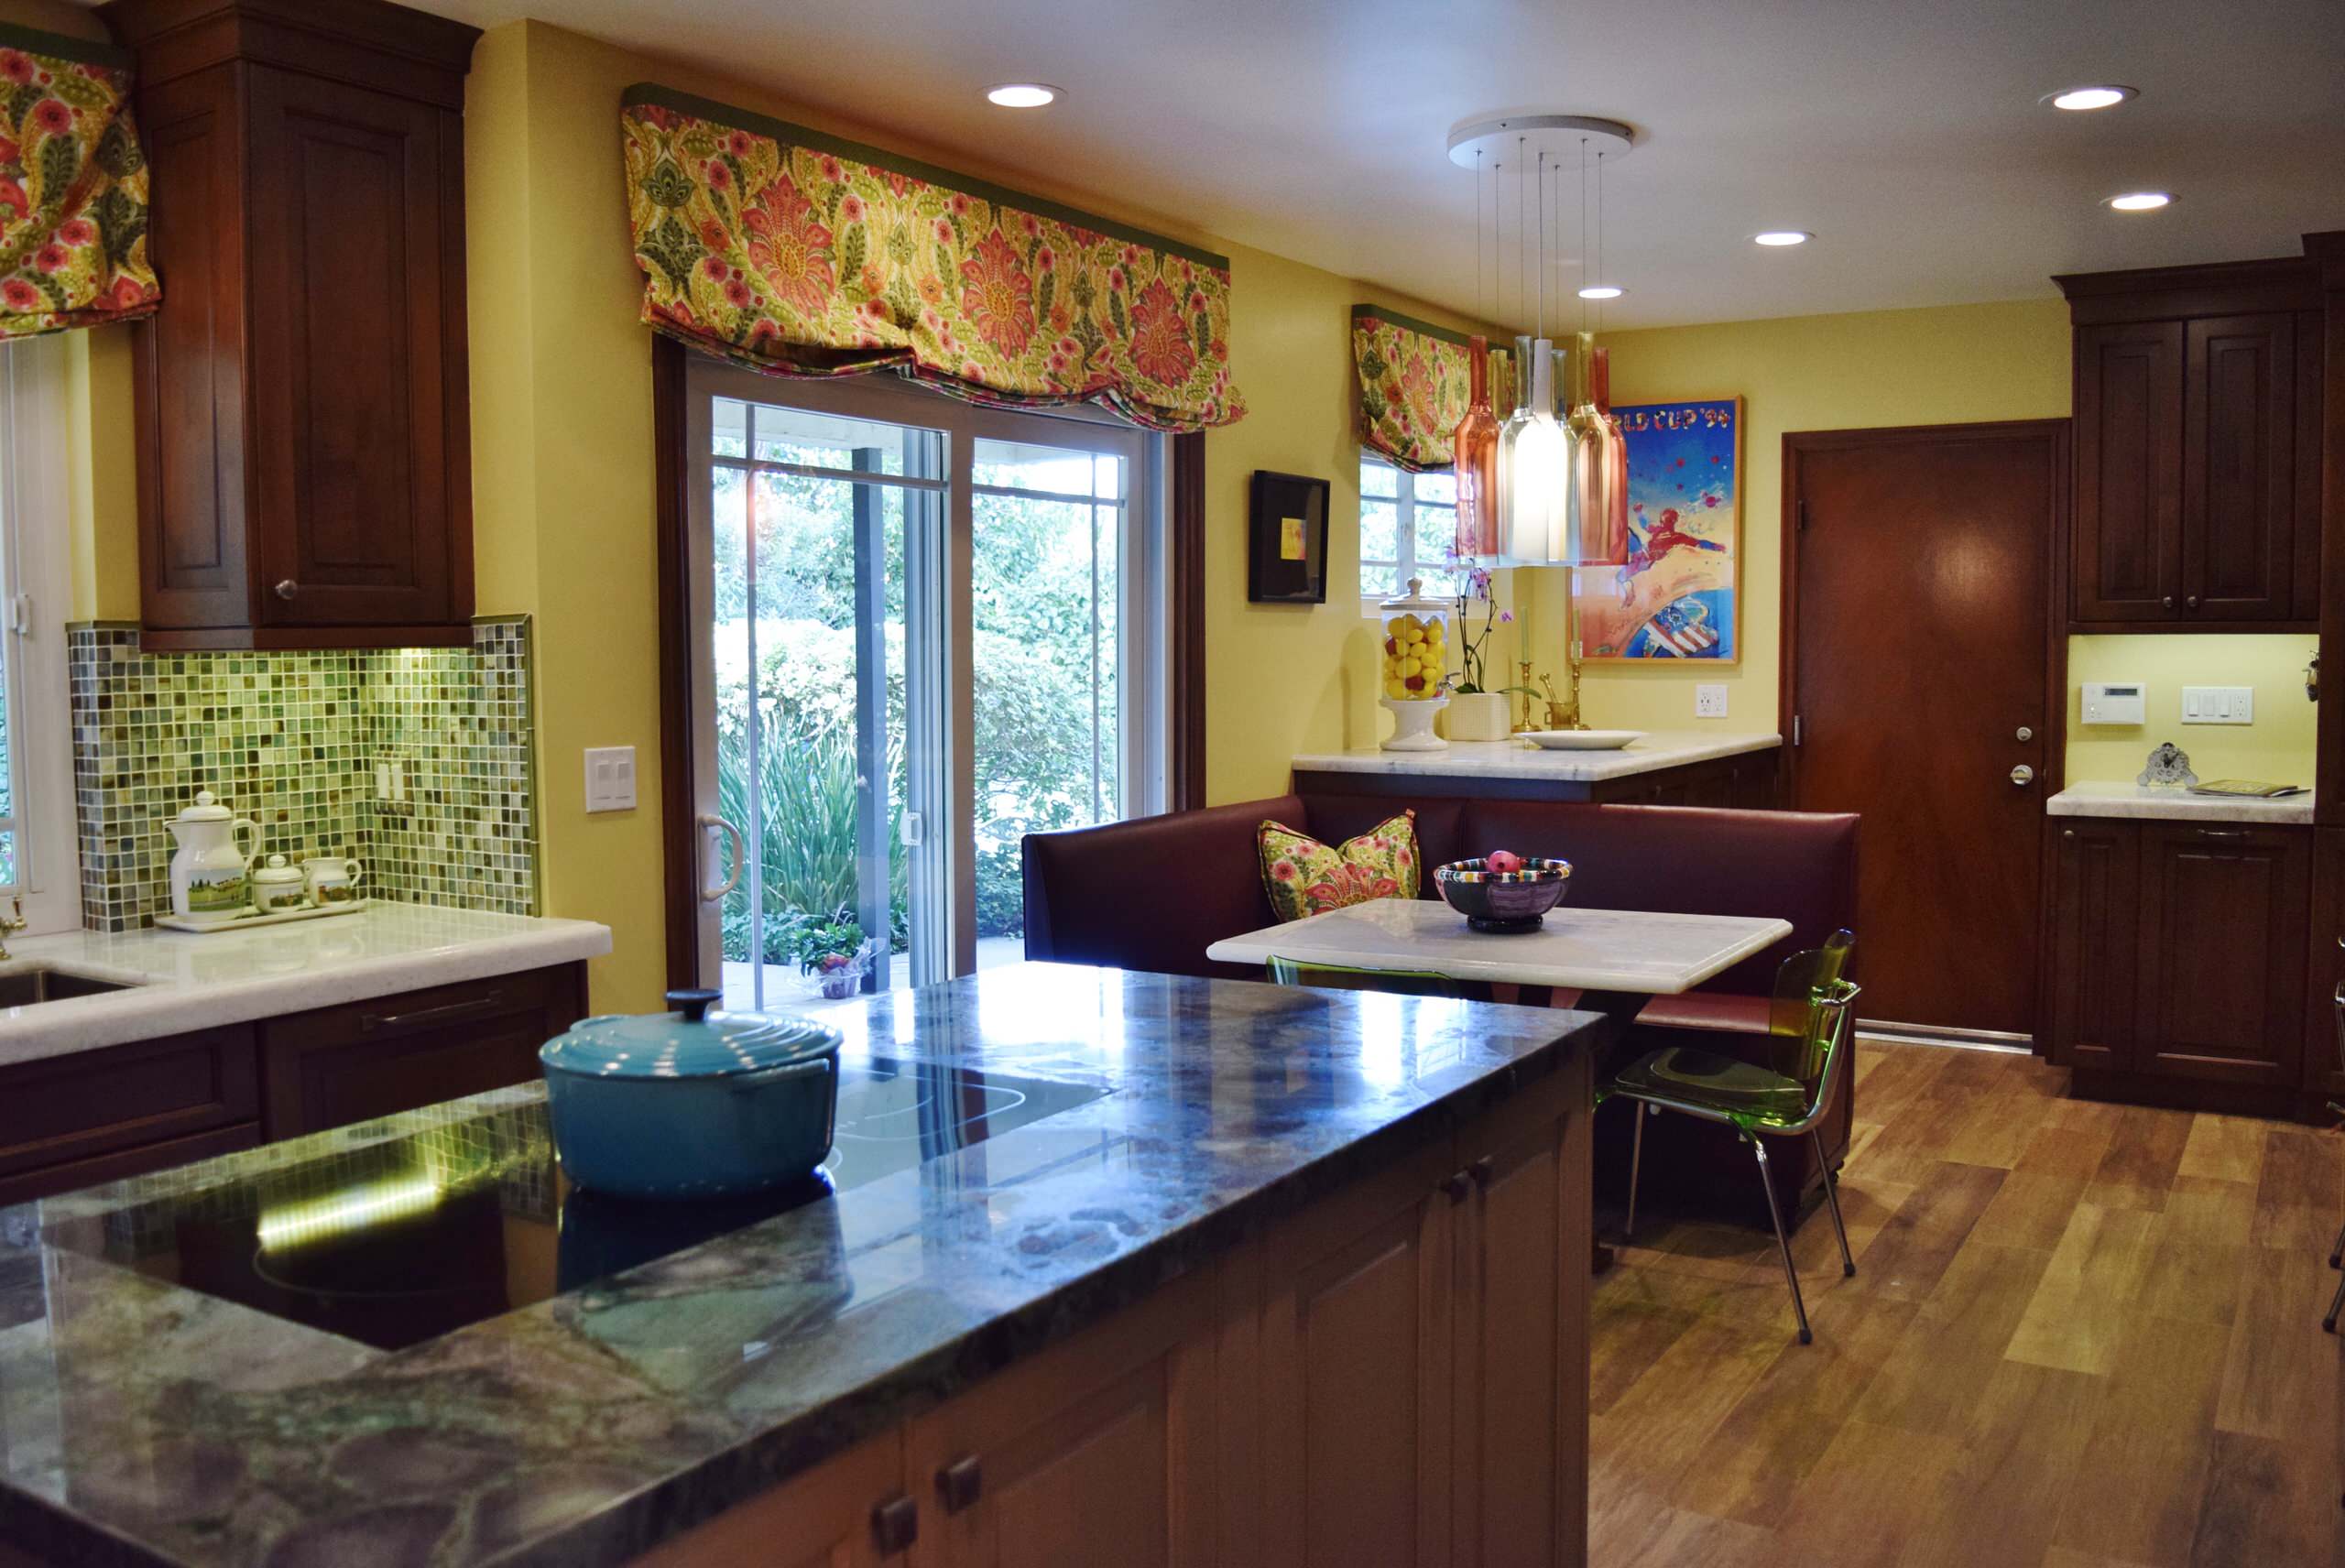 The Rubin Traditional Kitchen Remodel in Encino, Ca.